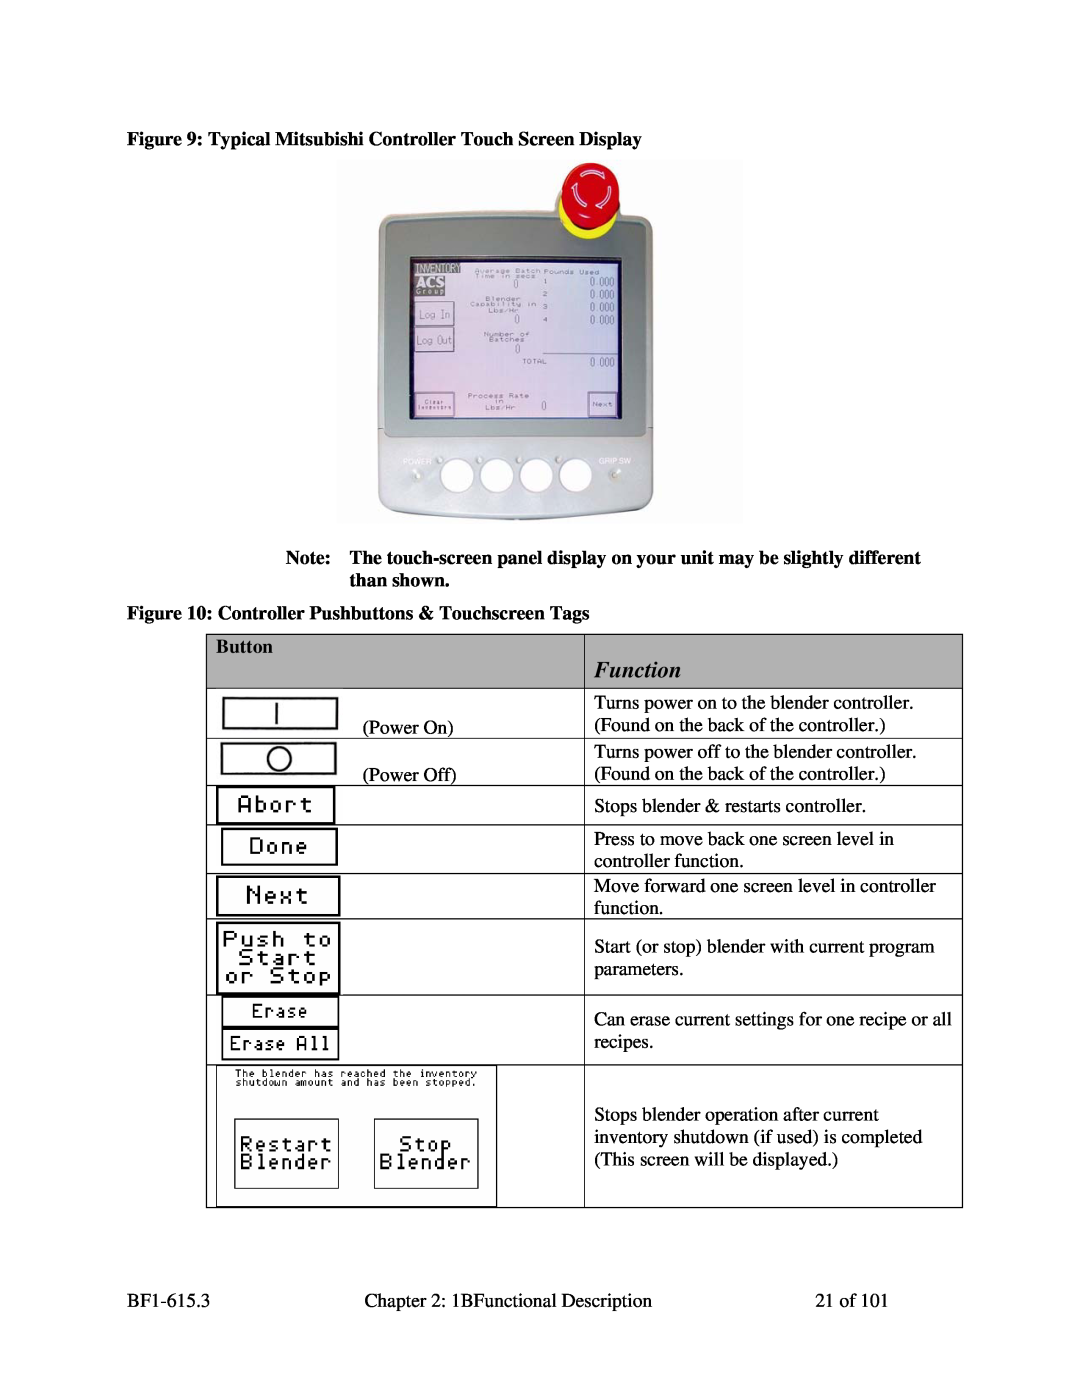 Mitsubishi Electronics 882.00273.00 specifications Typical Mitsubishi Controller Touch Screen Display, Button, Function 